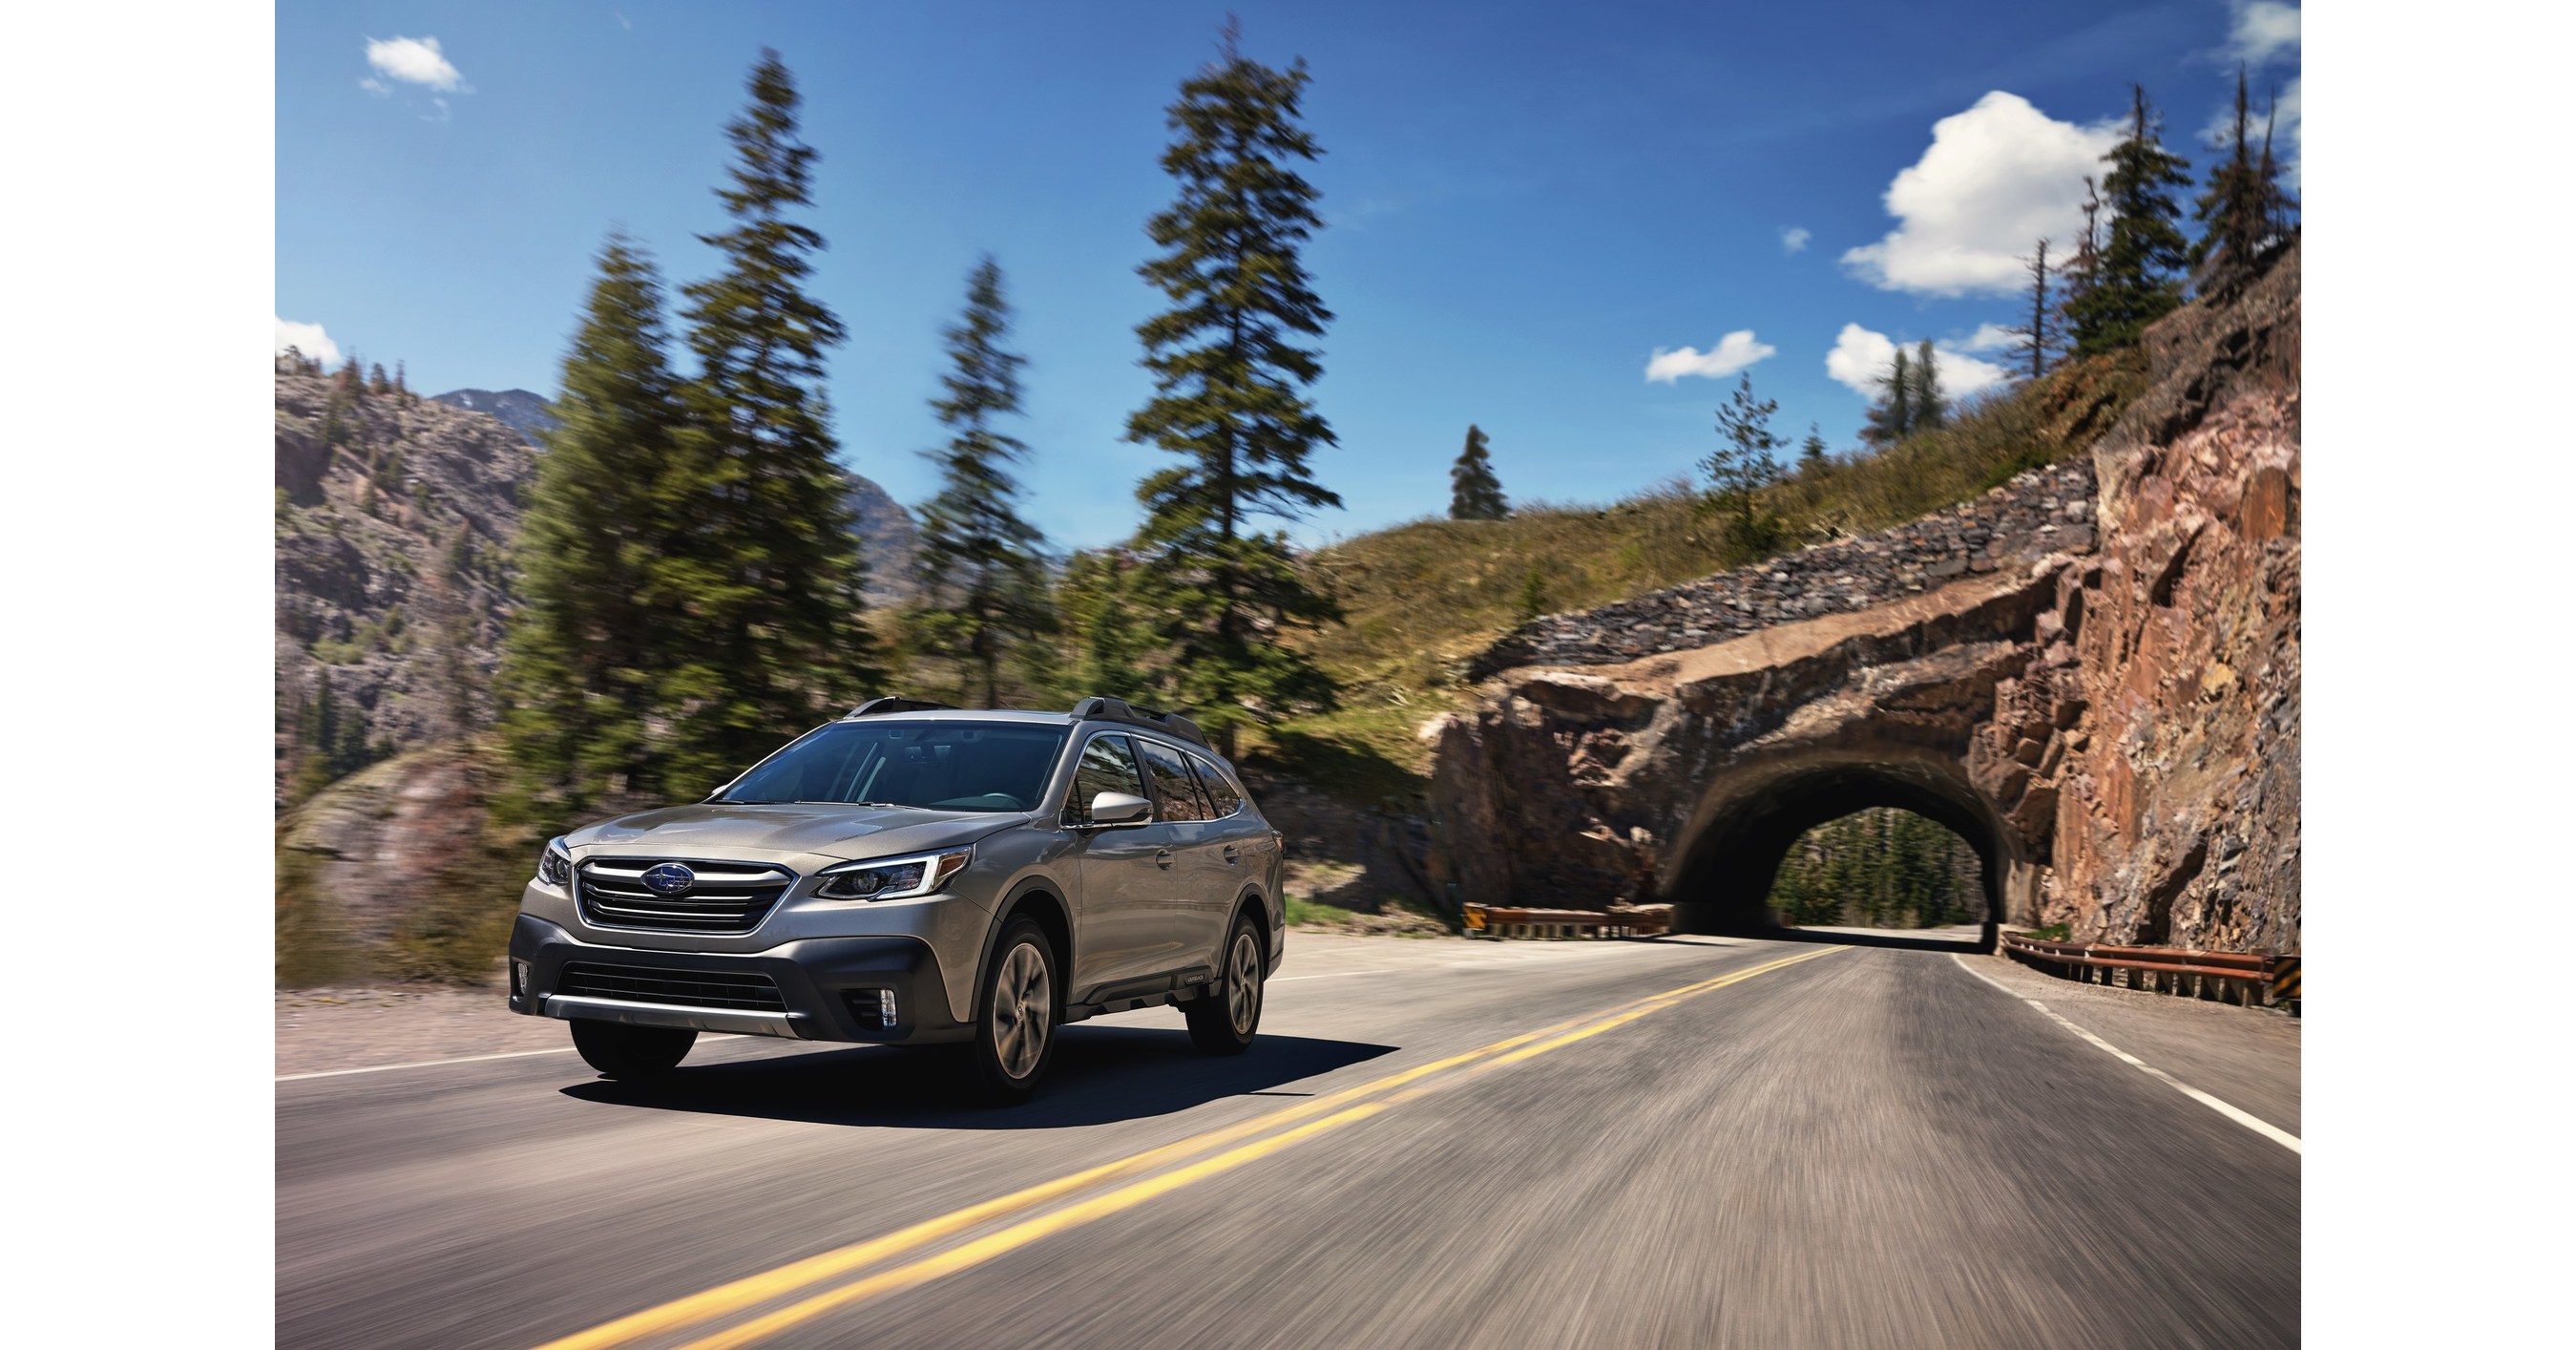 Announces Subaru Pricing For And 2020 Legacy Outback Models